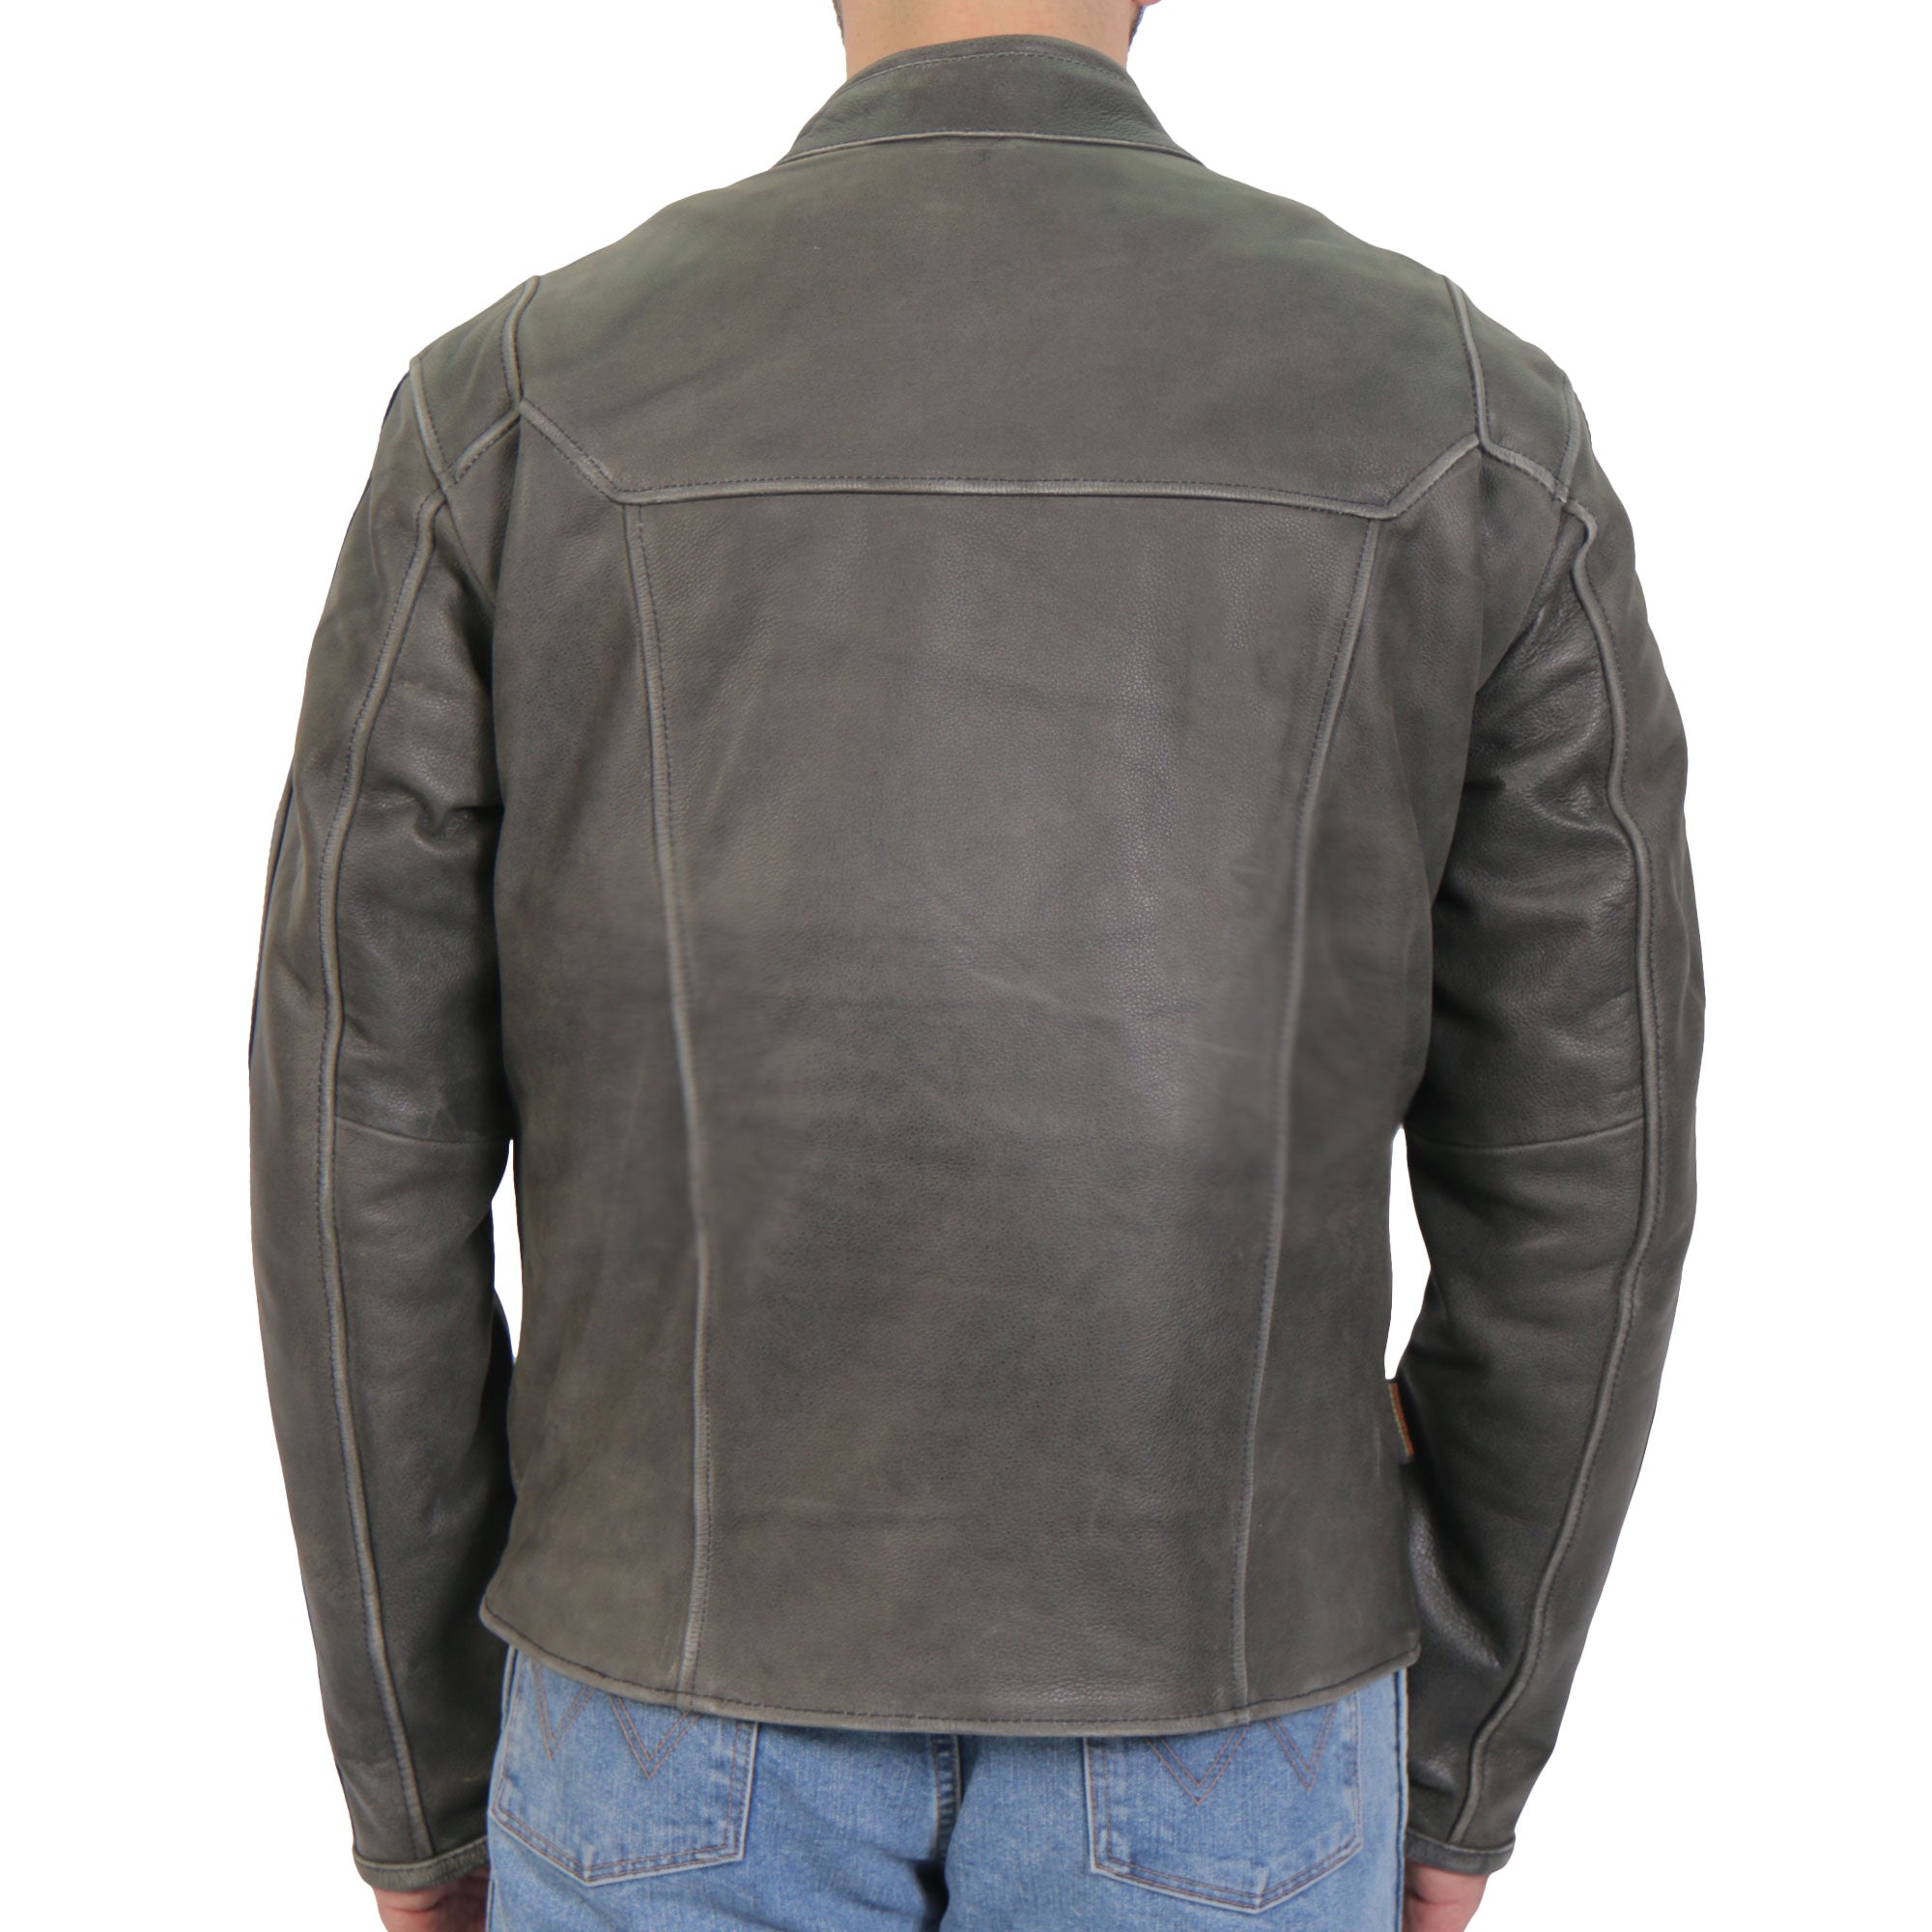 Hot Leathers JKM1033 Men’s Distress Grey ‘Café Racer' Biker Leather Motorcycle Jacket with Concealed Carry Pockets